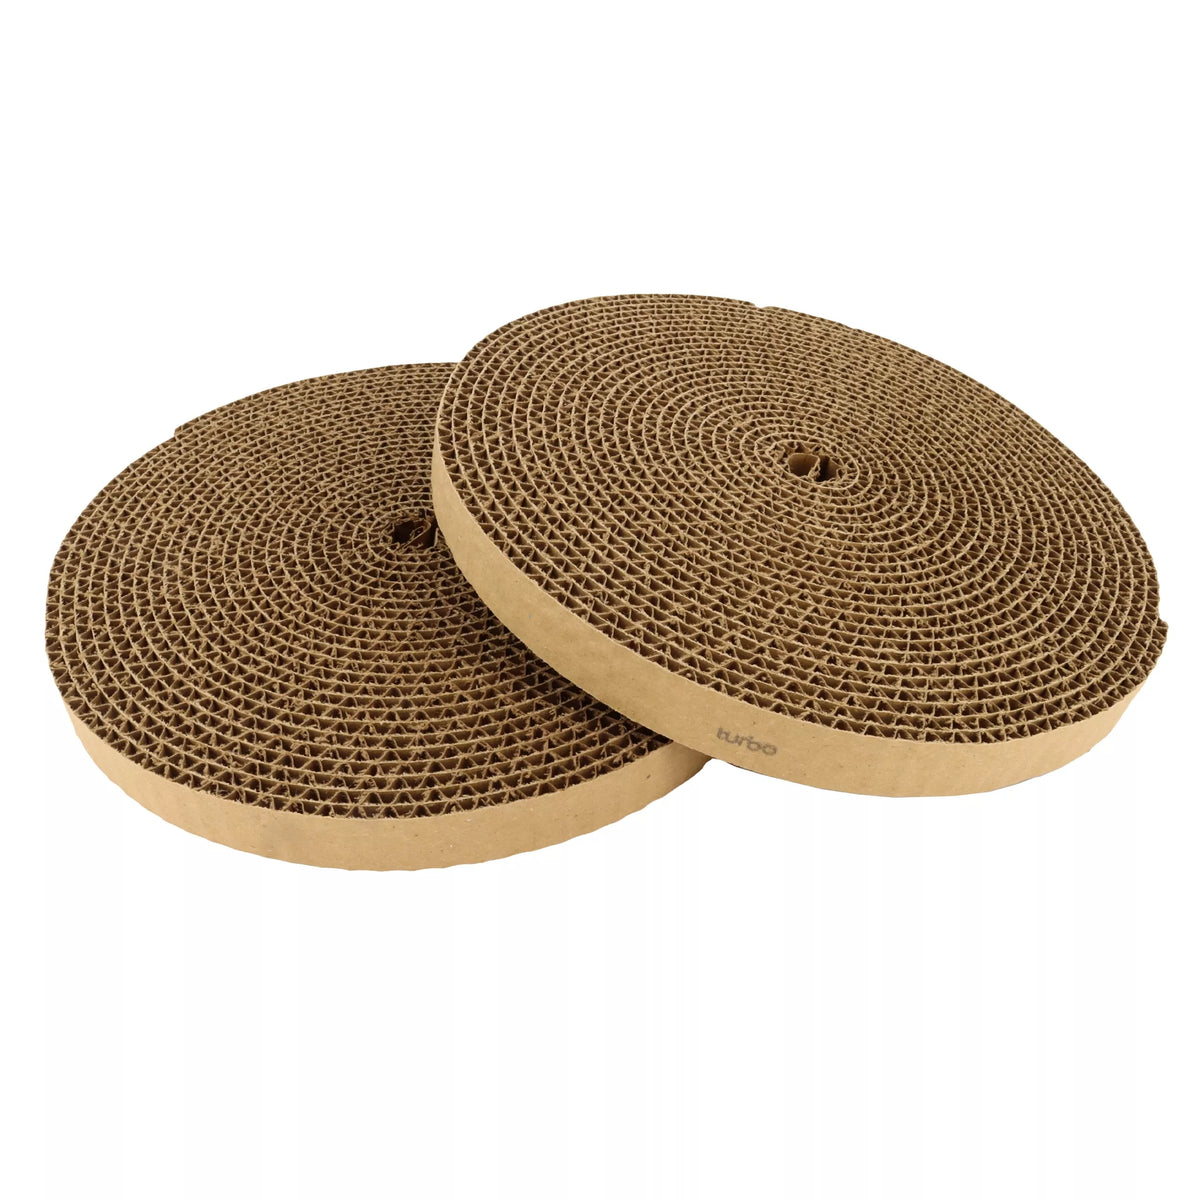 Turbo Scratcher Replacement Pads - 2 Pack